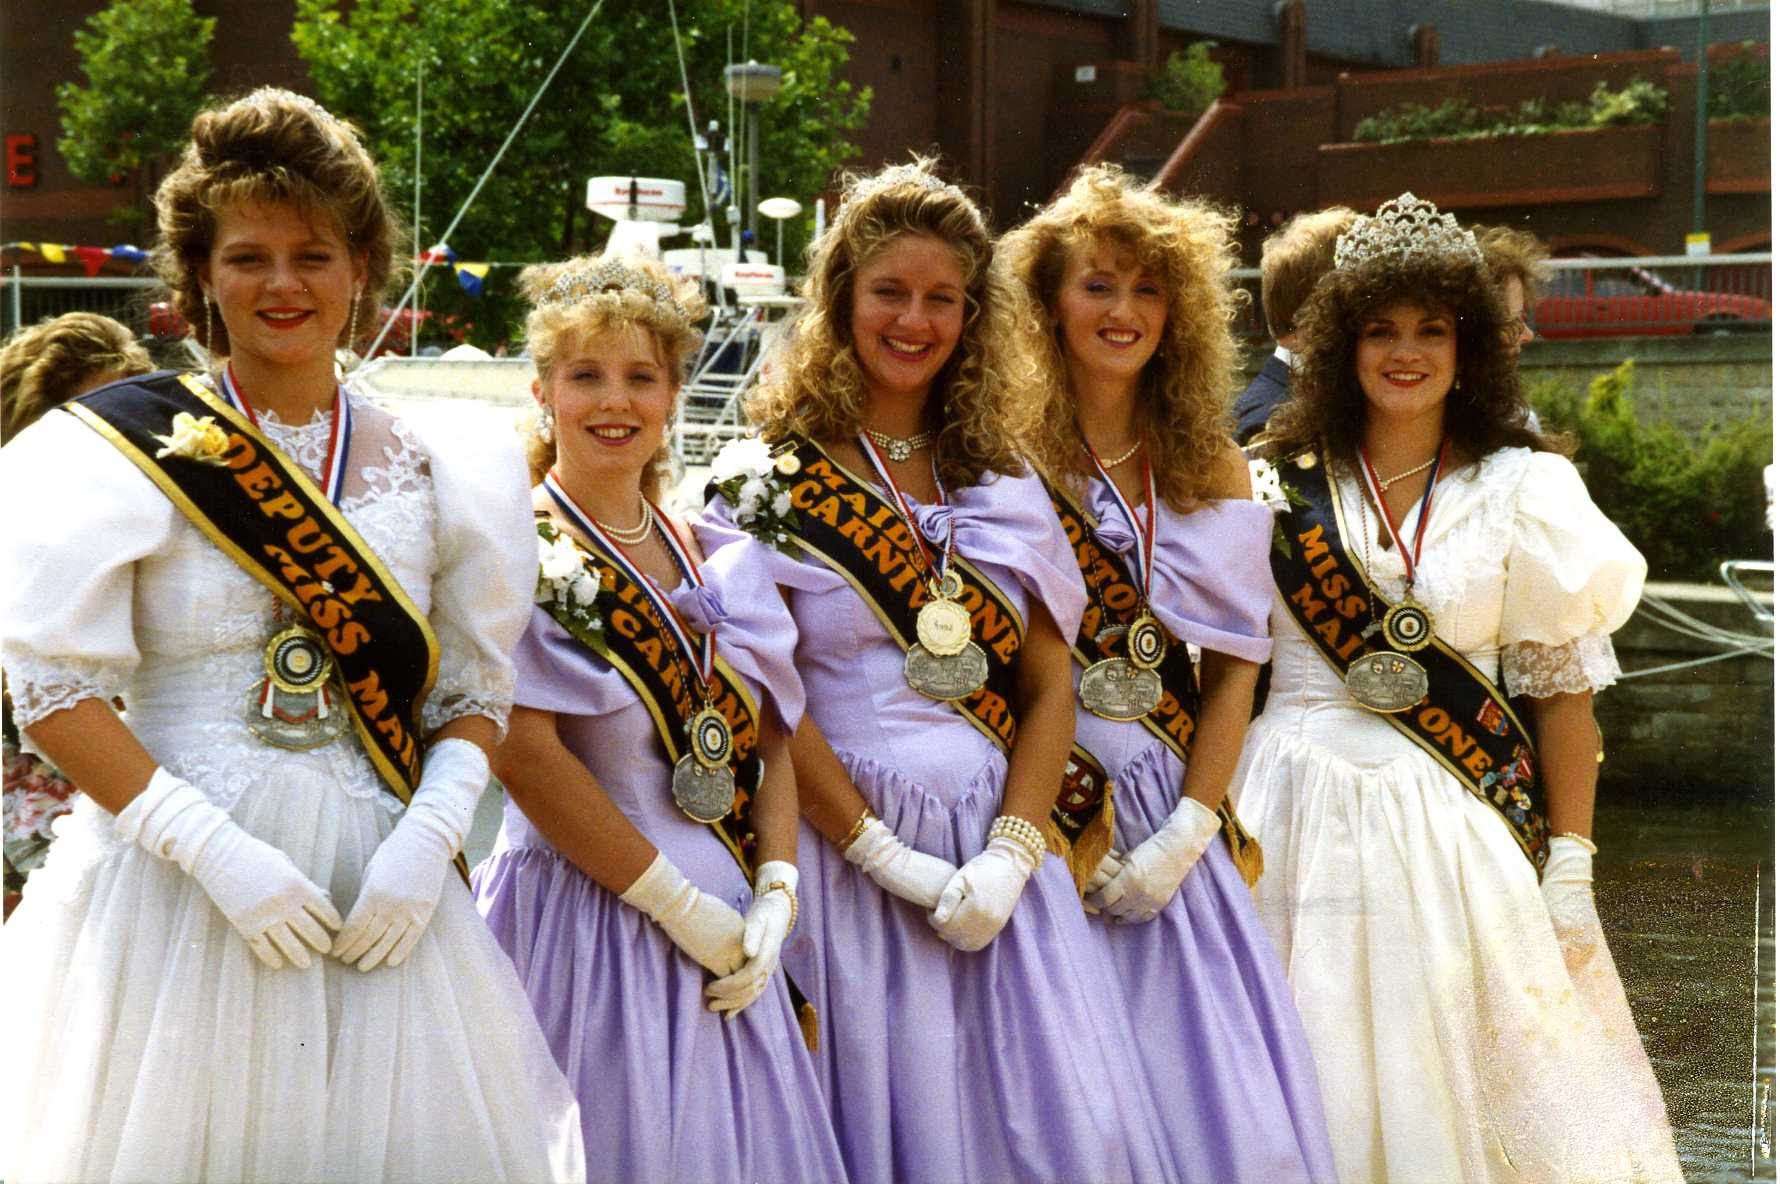 The Maidstone Carnival beauty queens with Miss Maidstone and her deputy